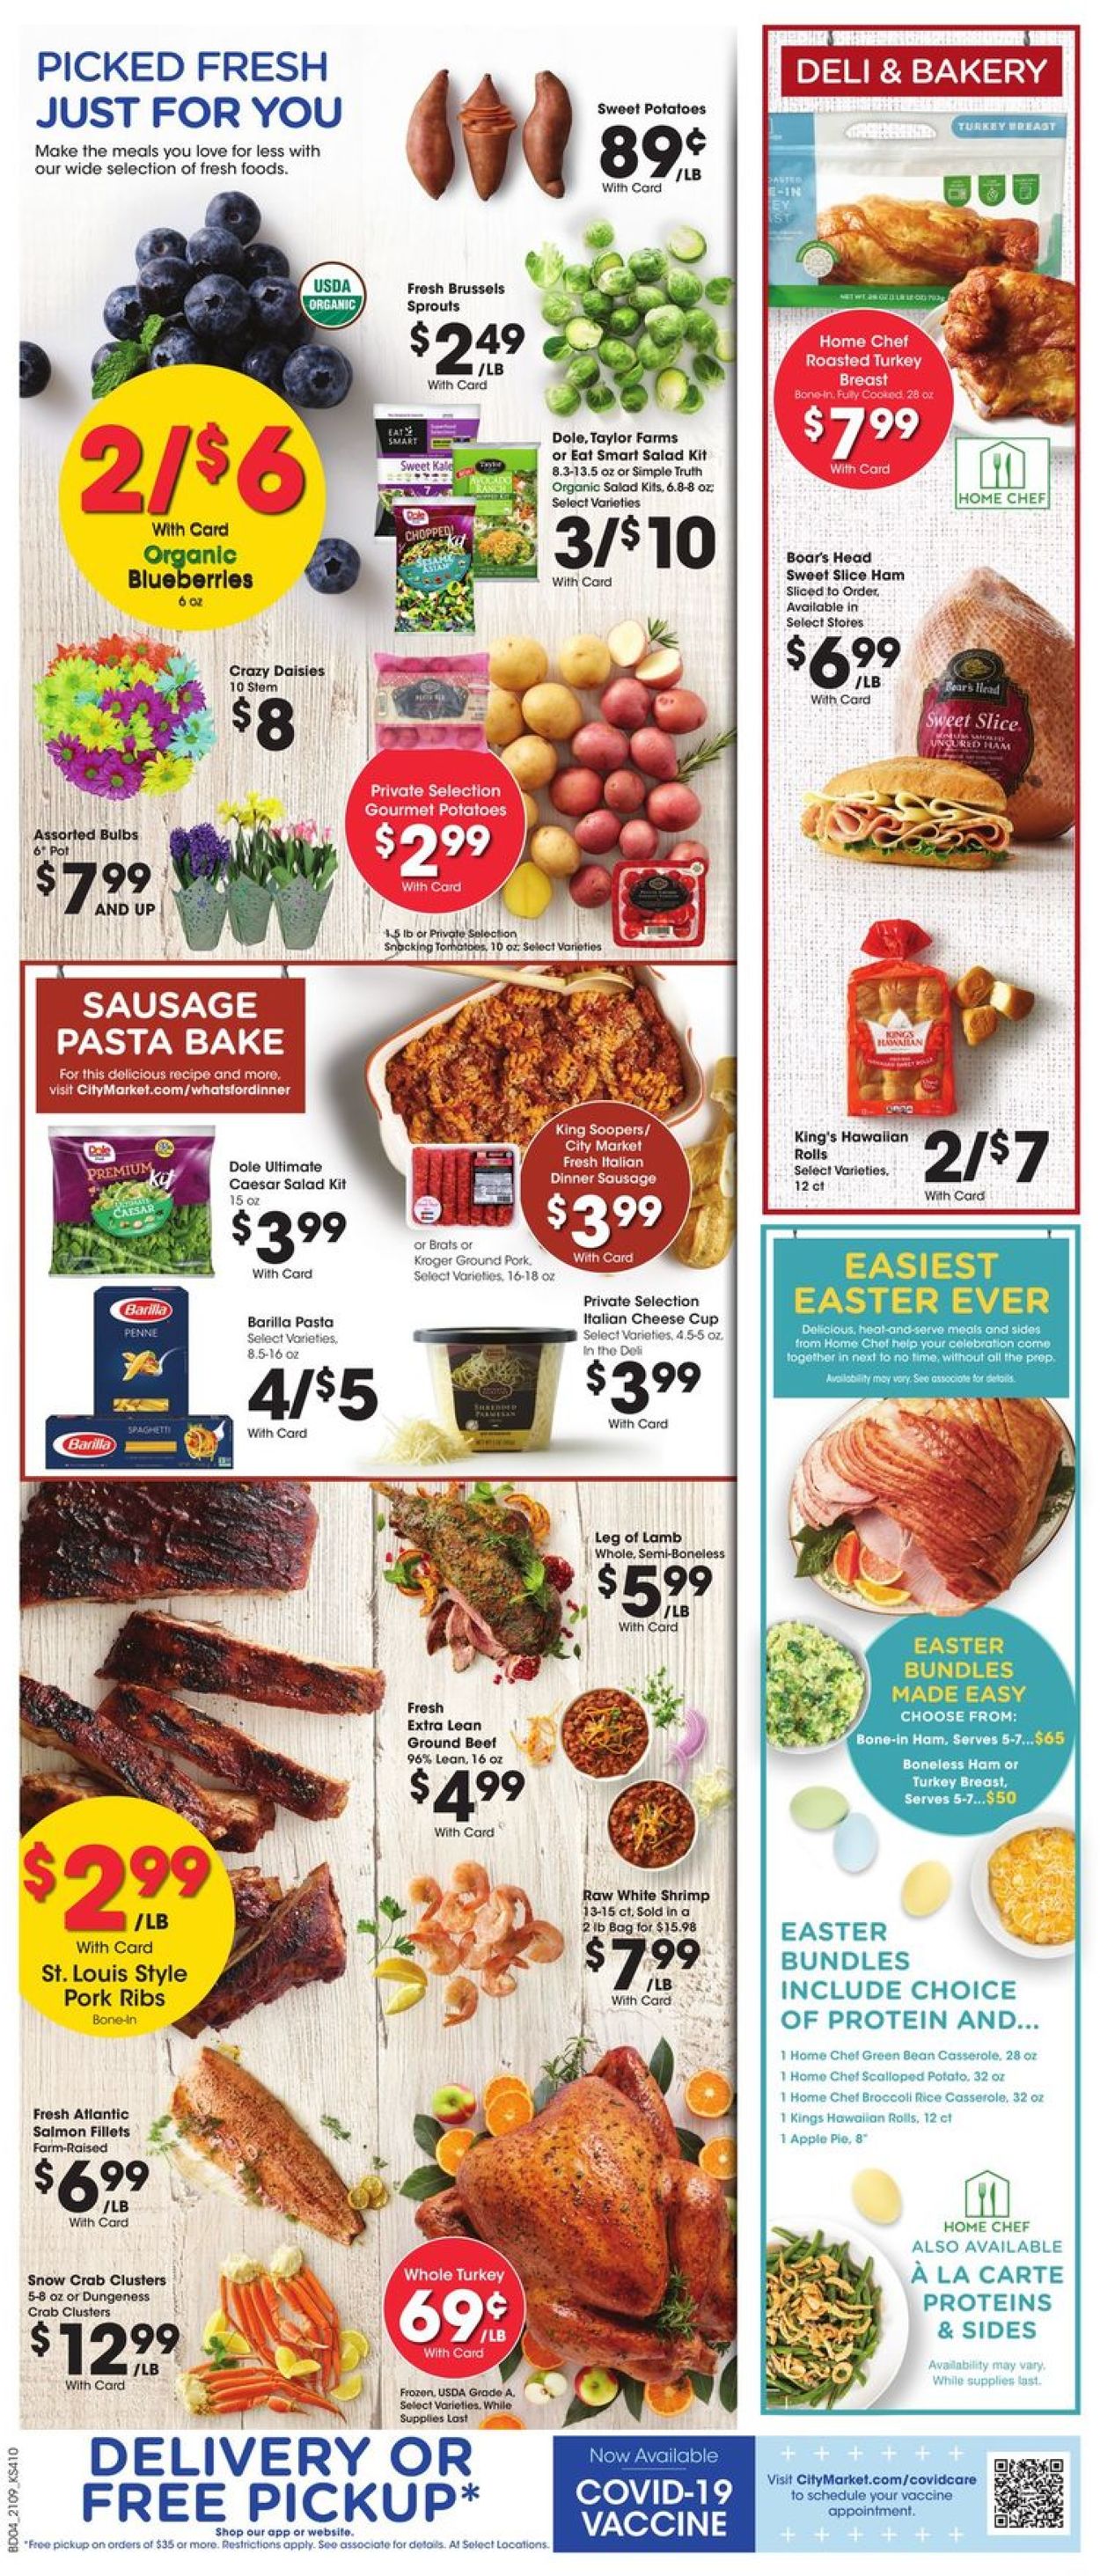 Catalogue City Market - Easter 2021 ad from 03/31/2021